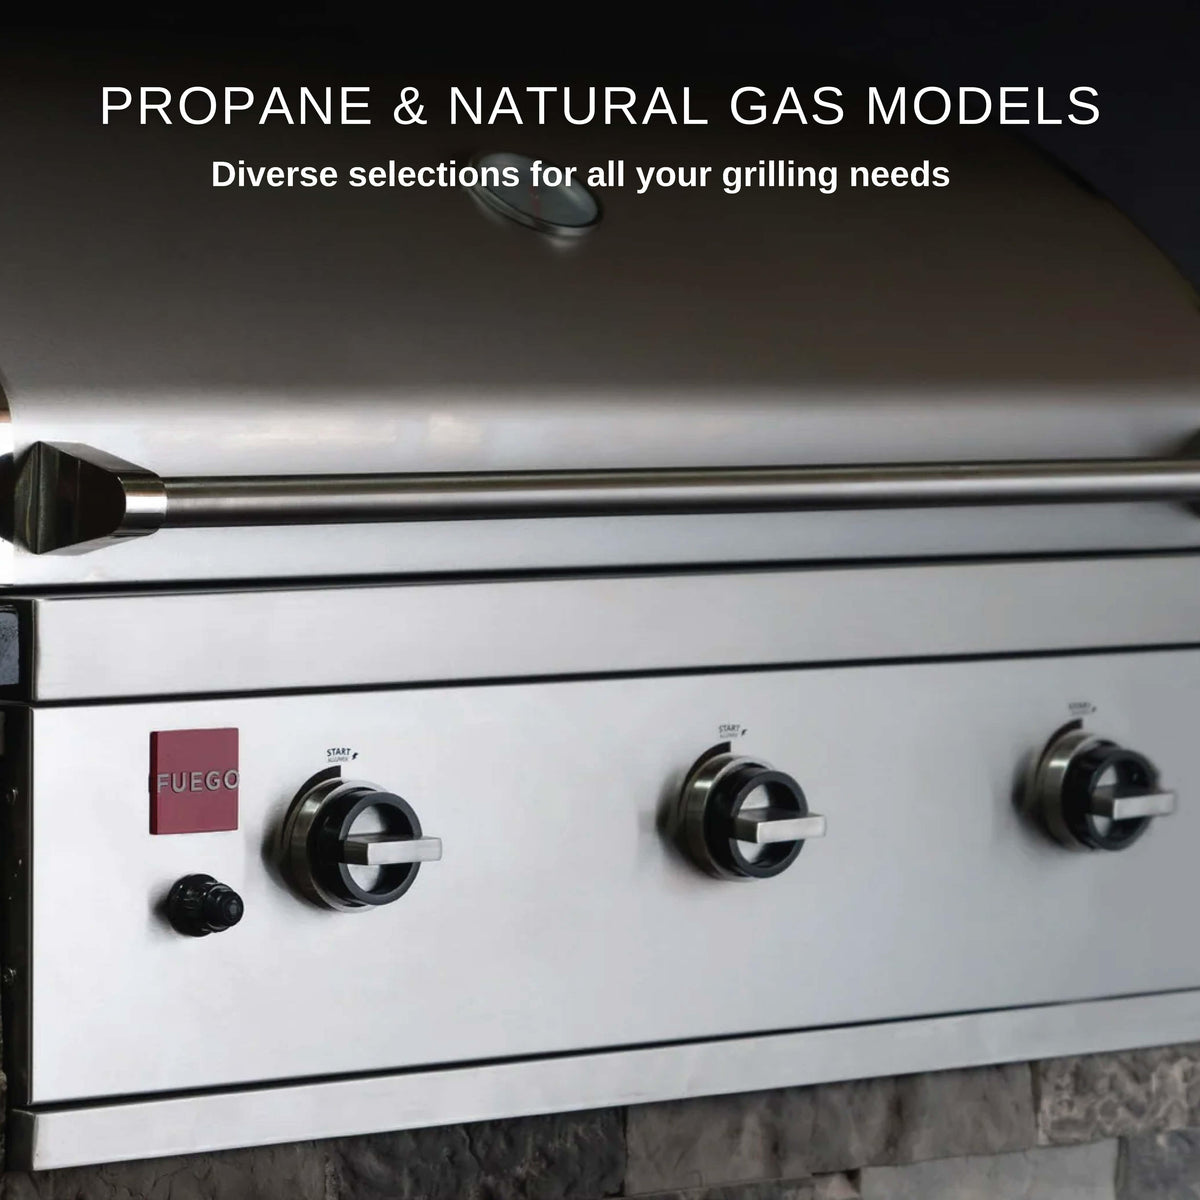 Fuego Grills Fuego 36” Built-In Gas Grill / Stainless Steel / F36S-B or F36S-B-NG